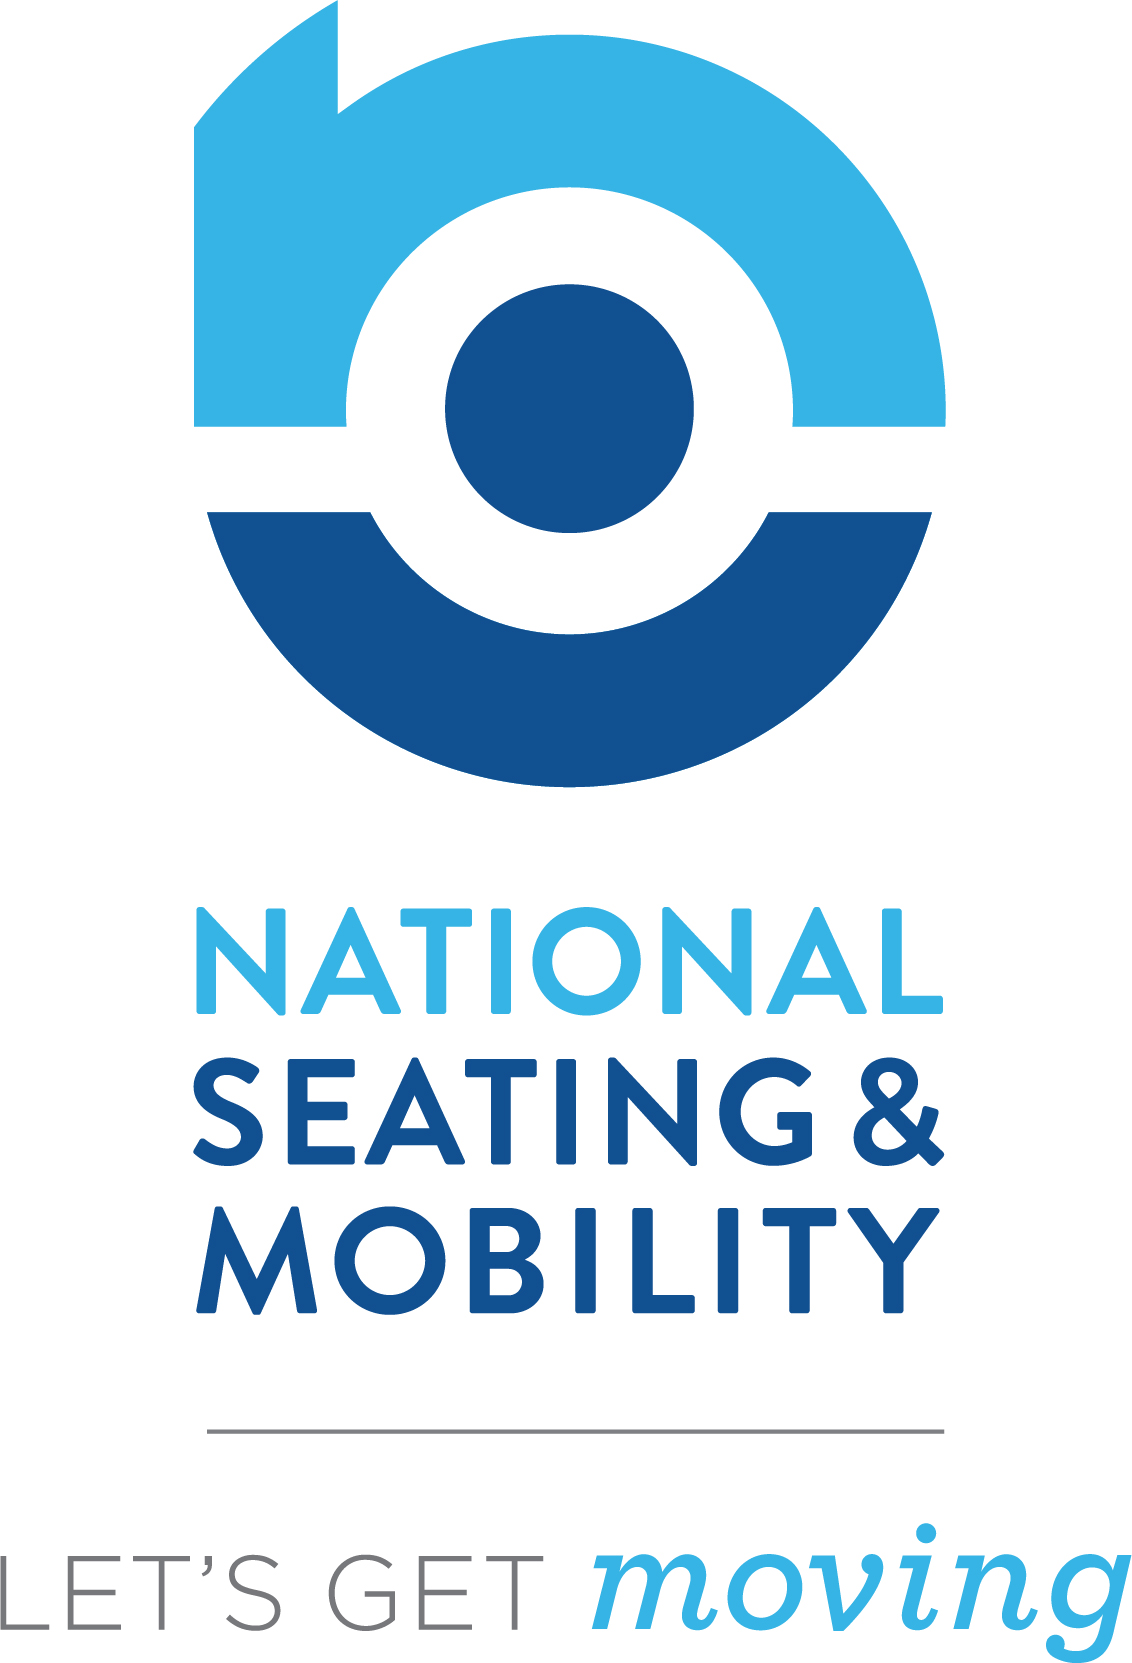 National Seating & Mobility